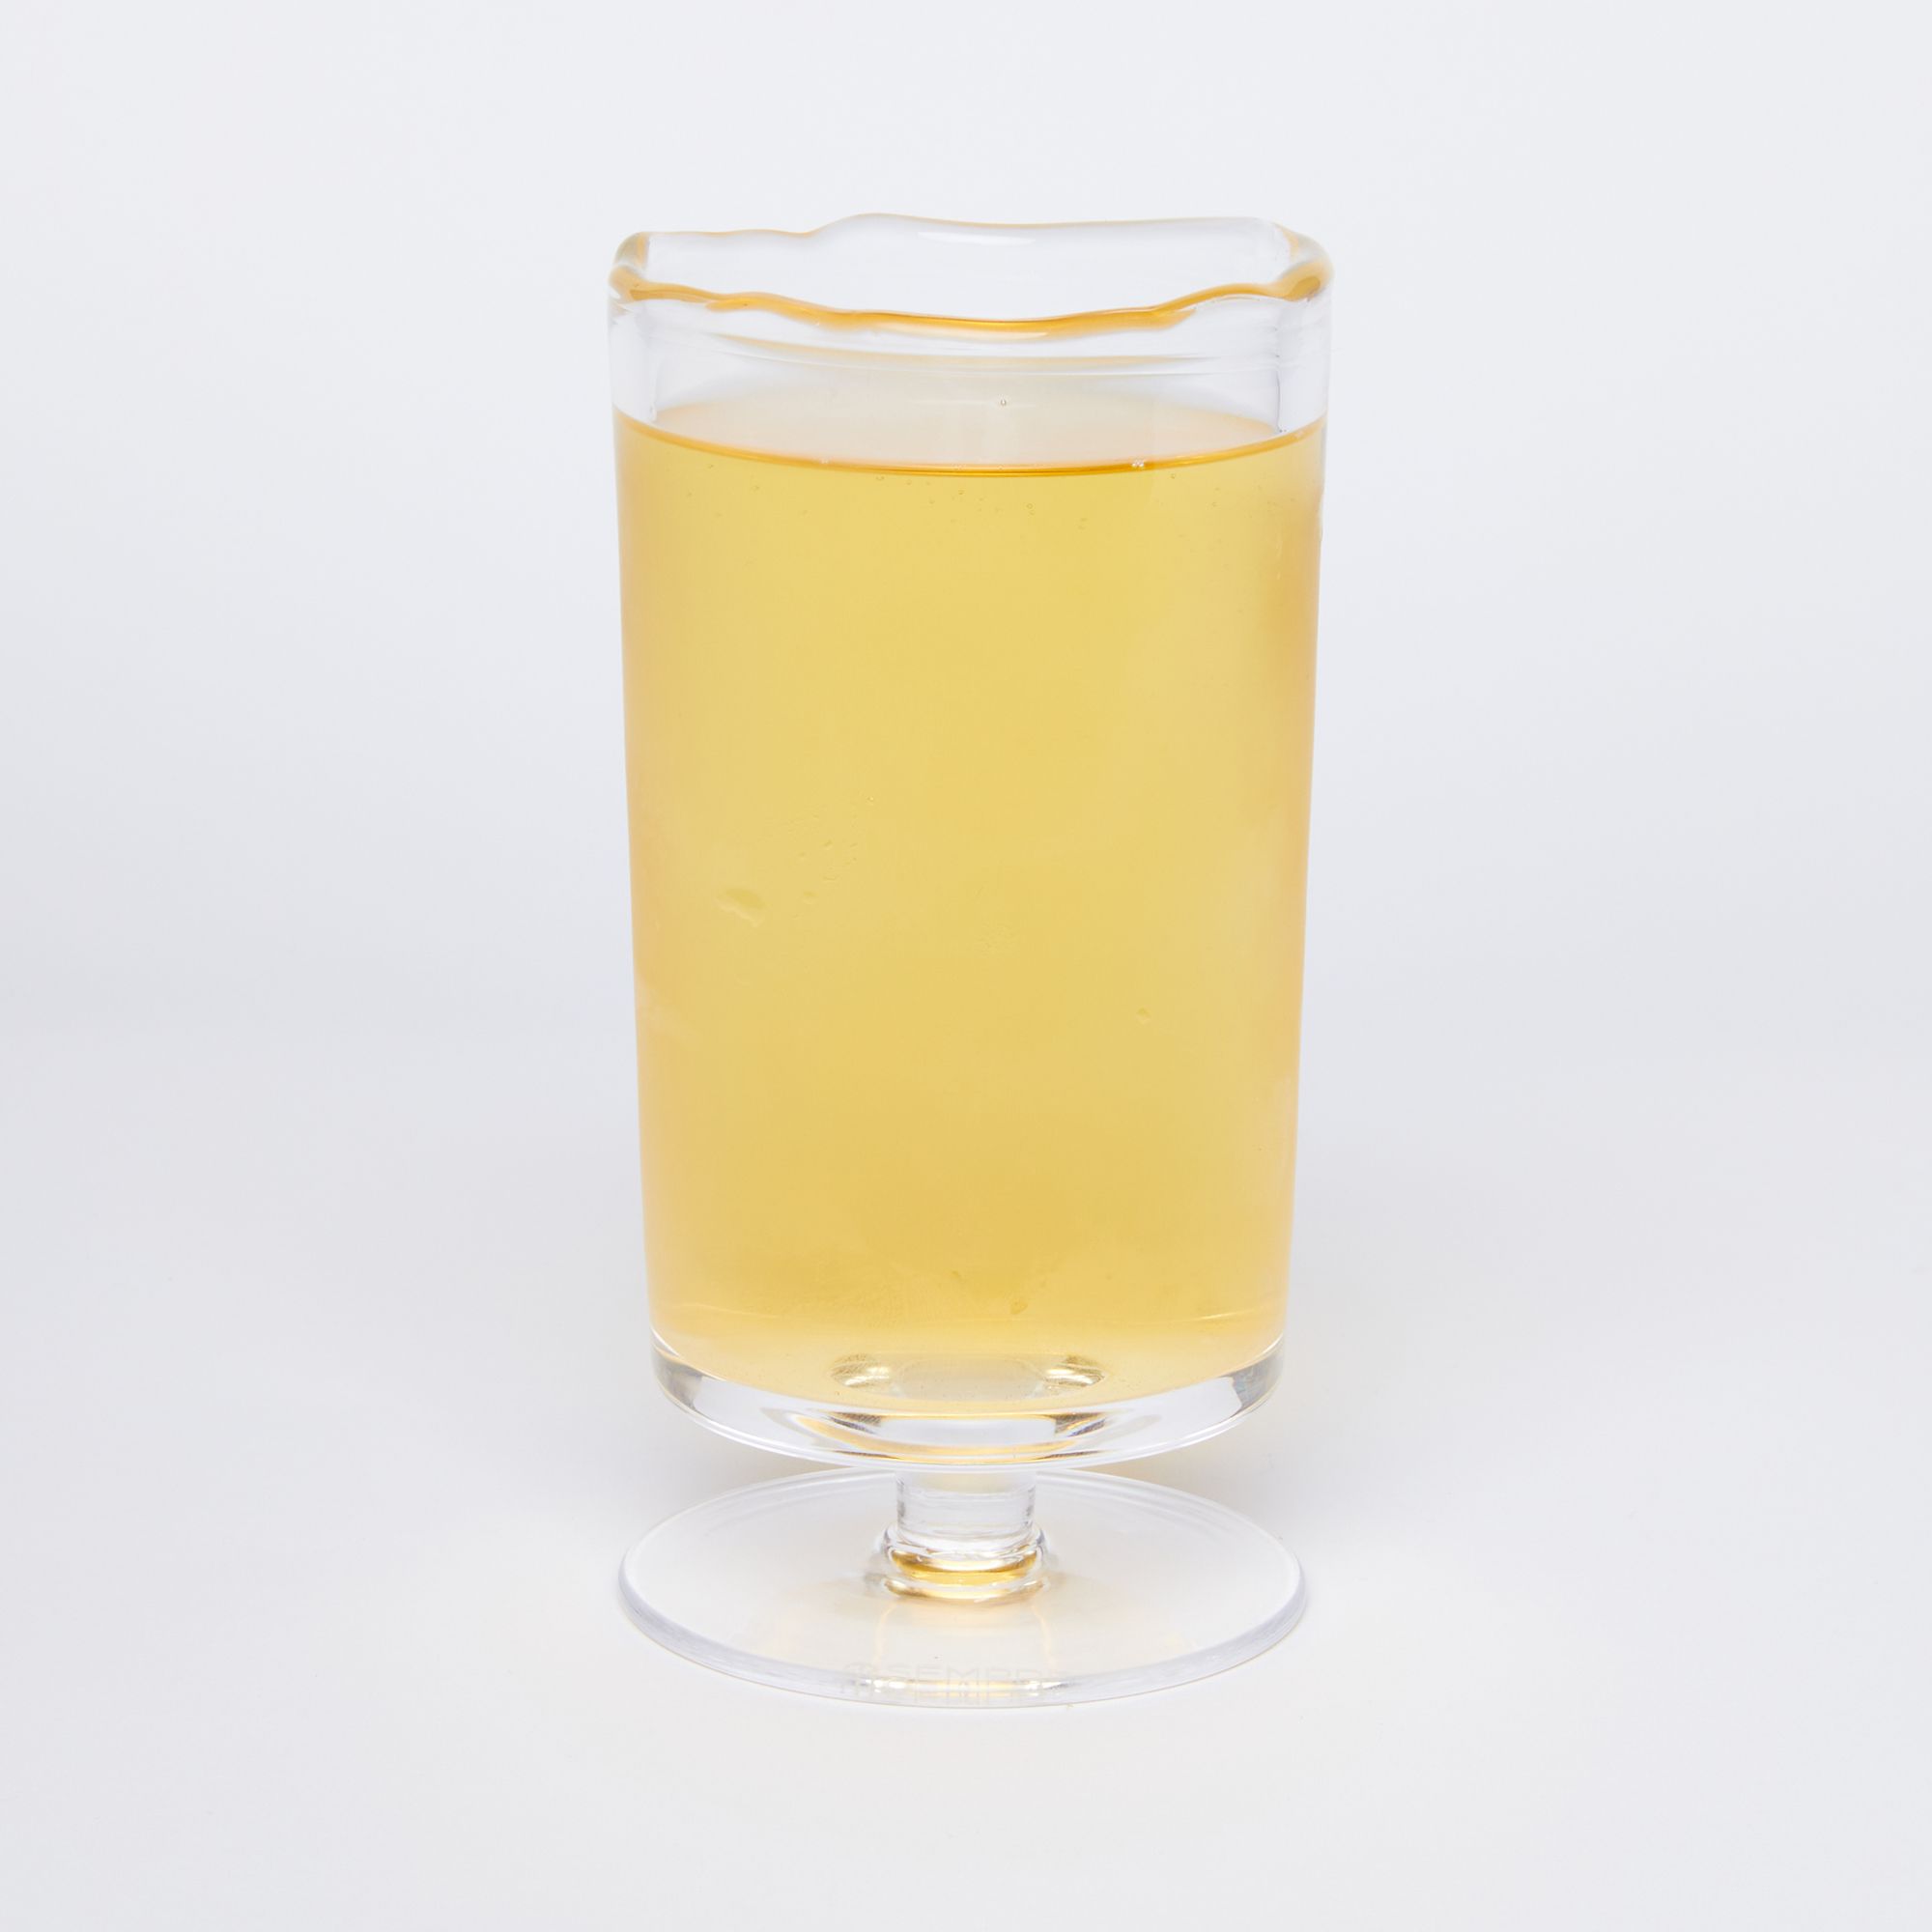 long bodied footed glass filled with beer